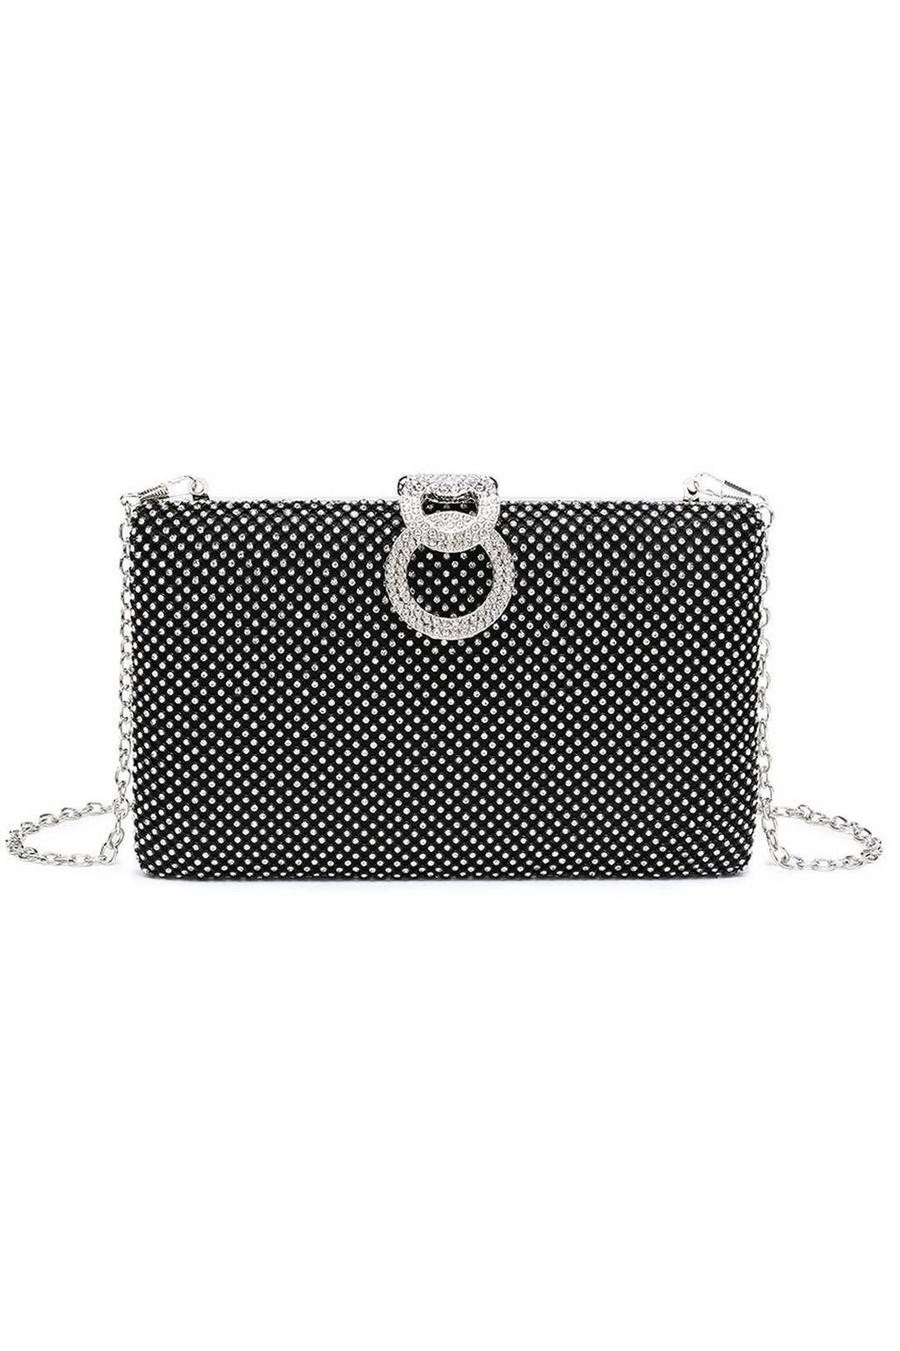 Black Sparkly Double Ring Clasp Rhinestones Evening Clutch Bag